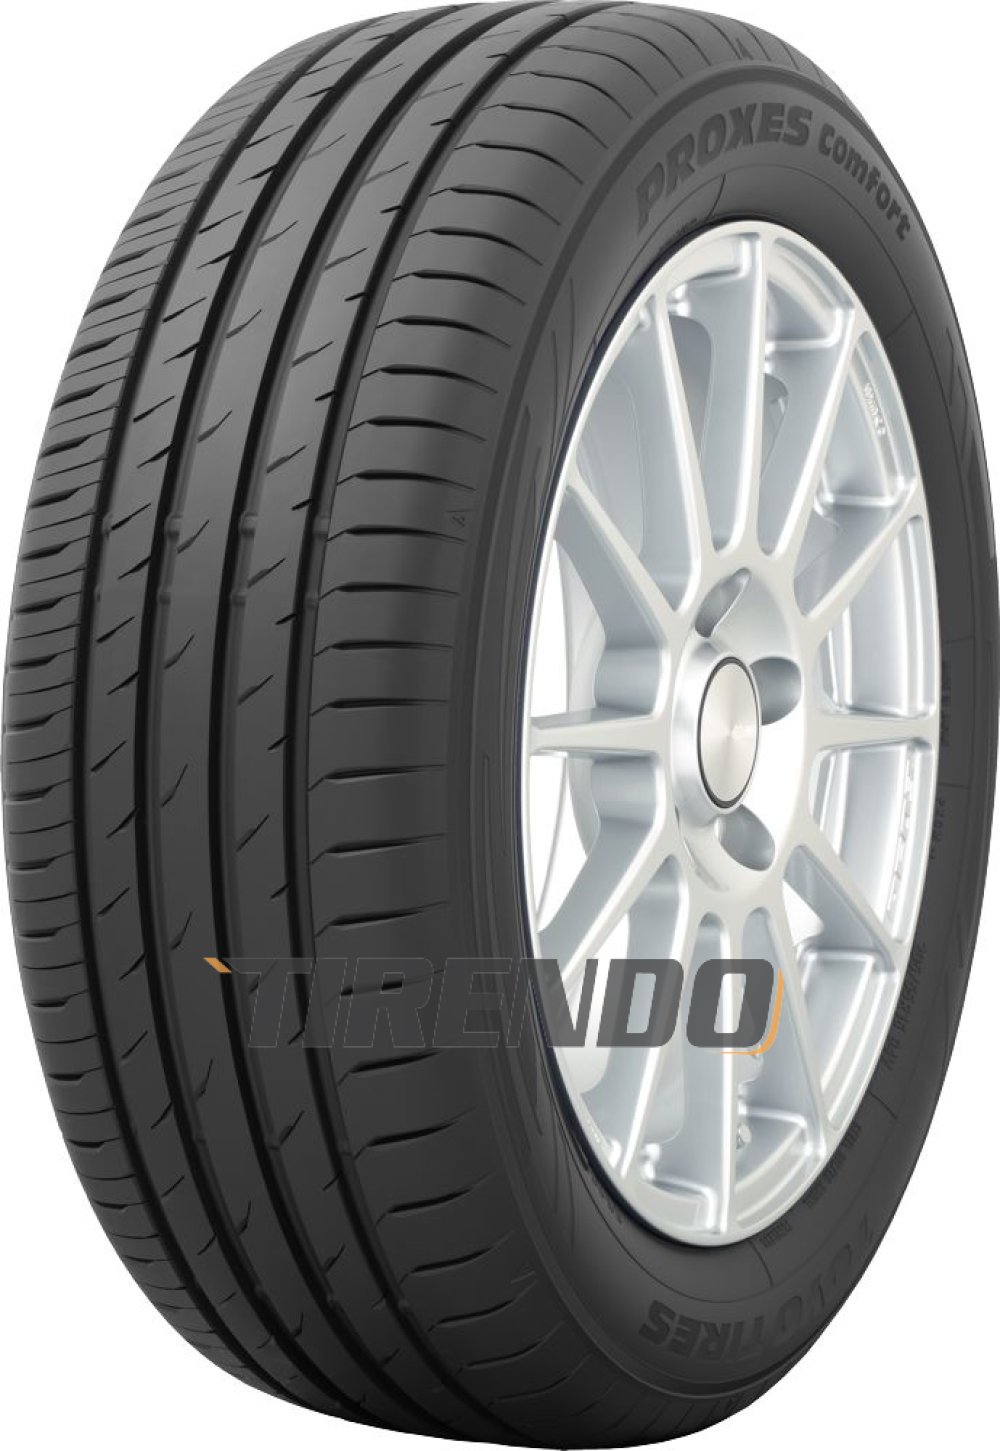 Image of Toyo Proxes Comfort ( 205/55 R16 94V XL )